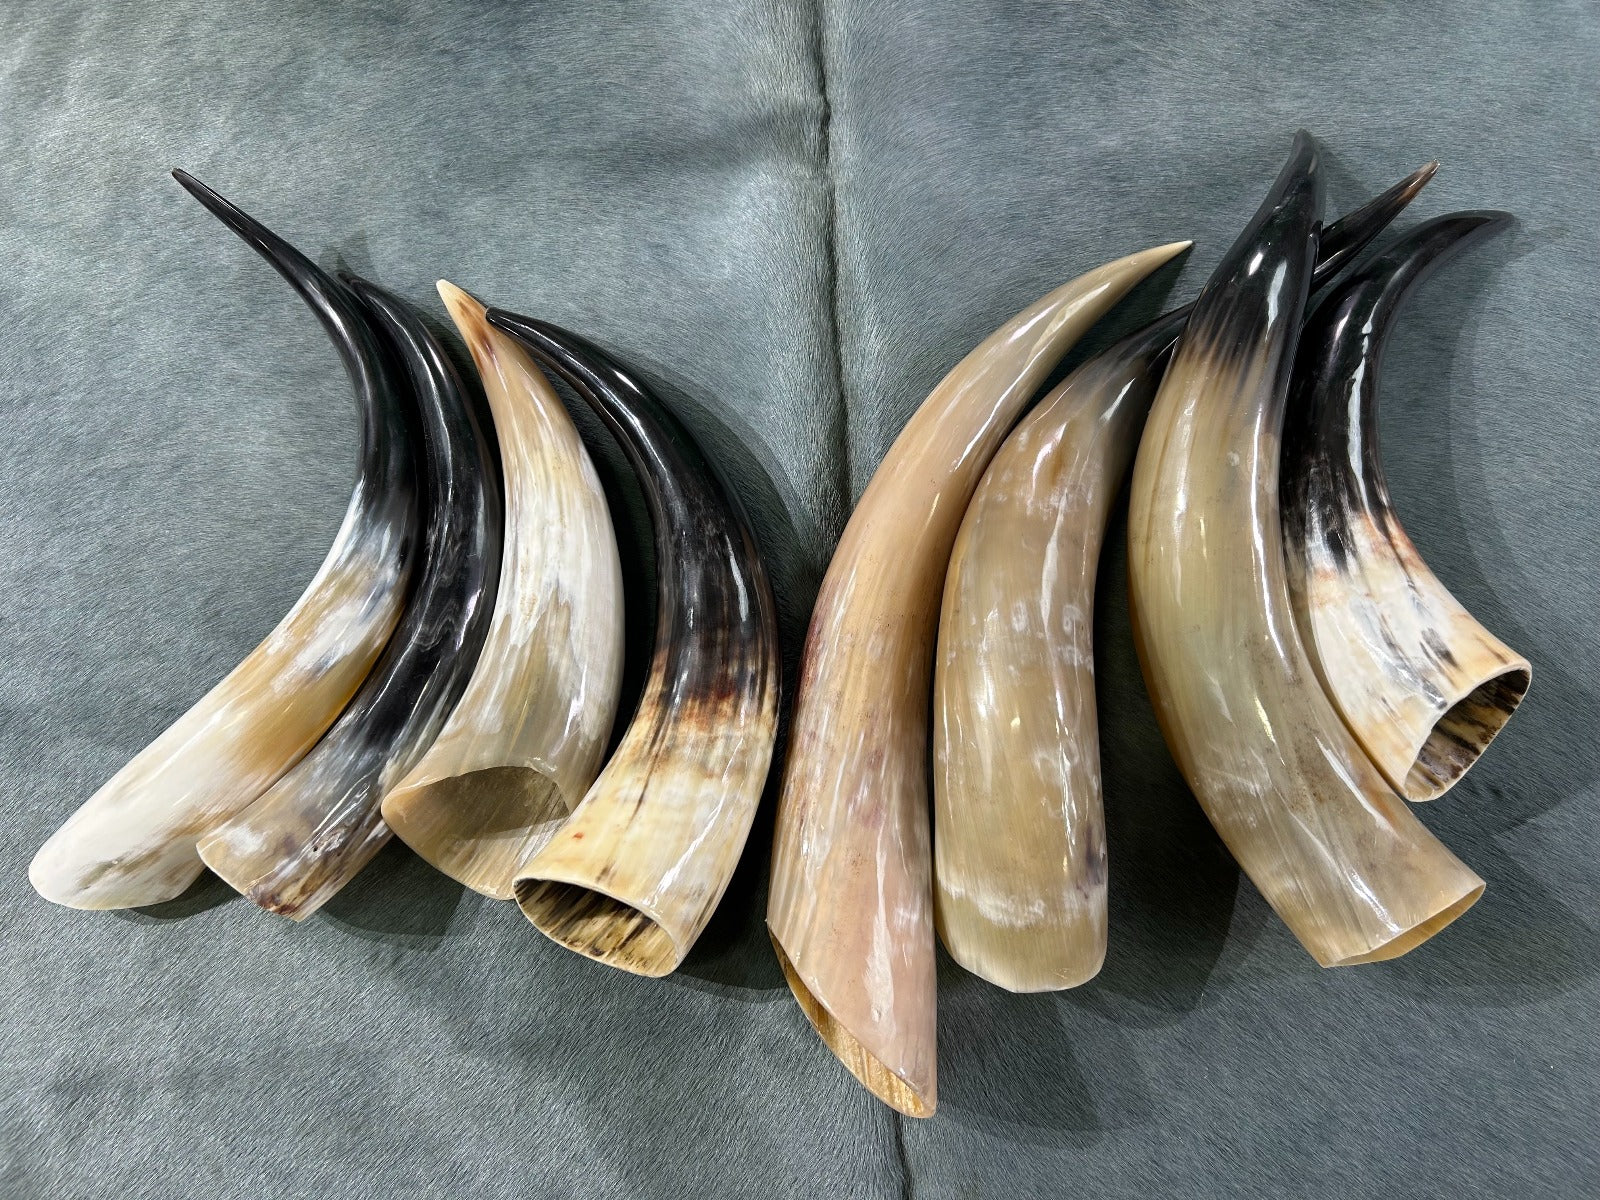 1 Polished Ox Horn, Gorgeous Polished Cow Horns , Cattle Horn - Size: Approx. 14 and 19" (measured straight)/ Base is about 3 to 4" wide